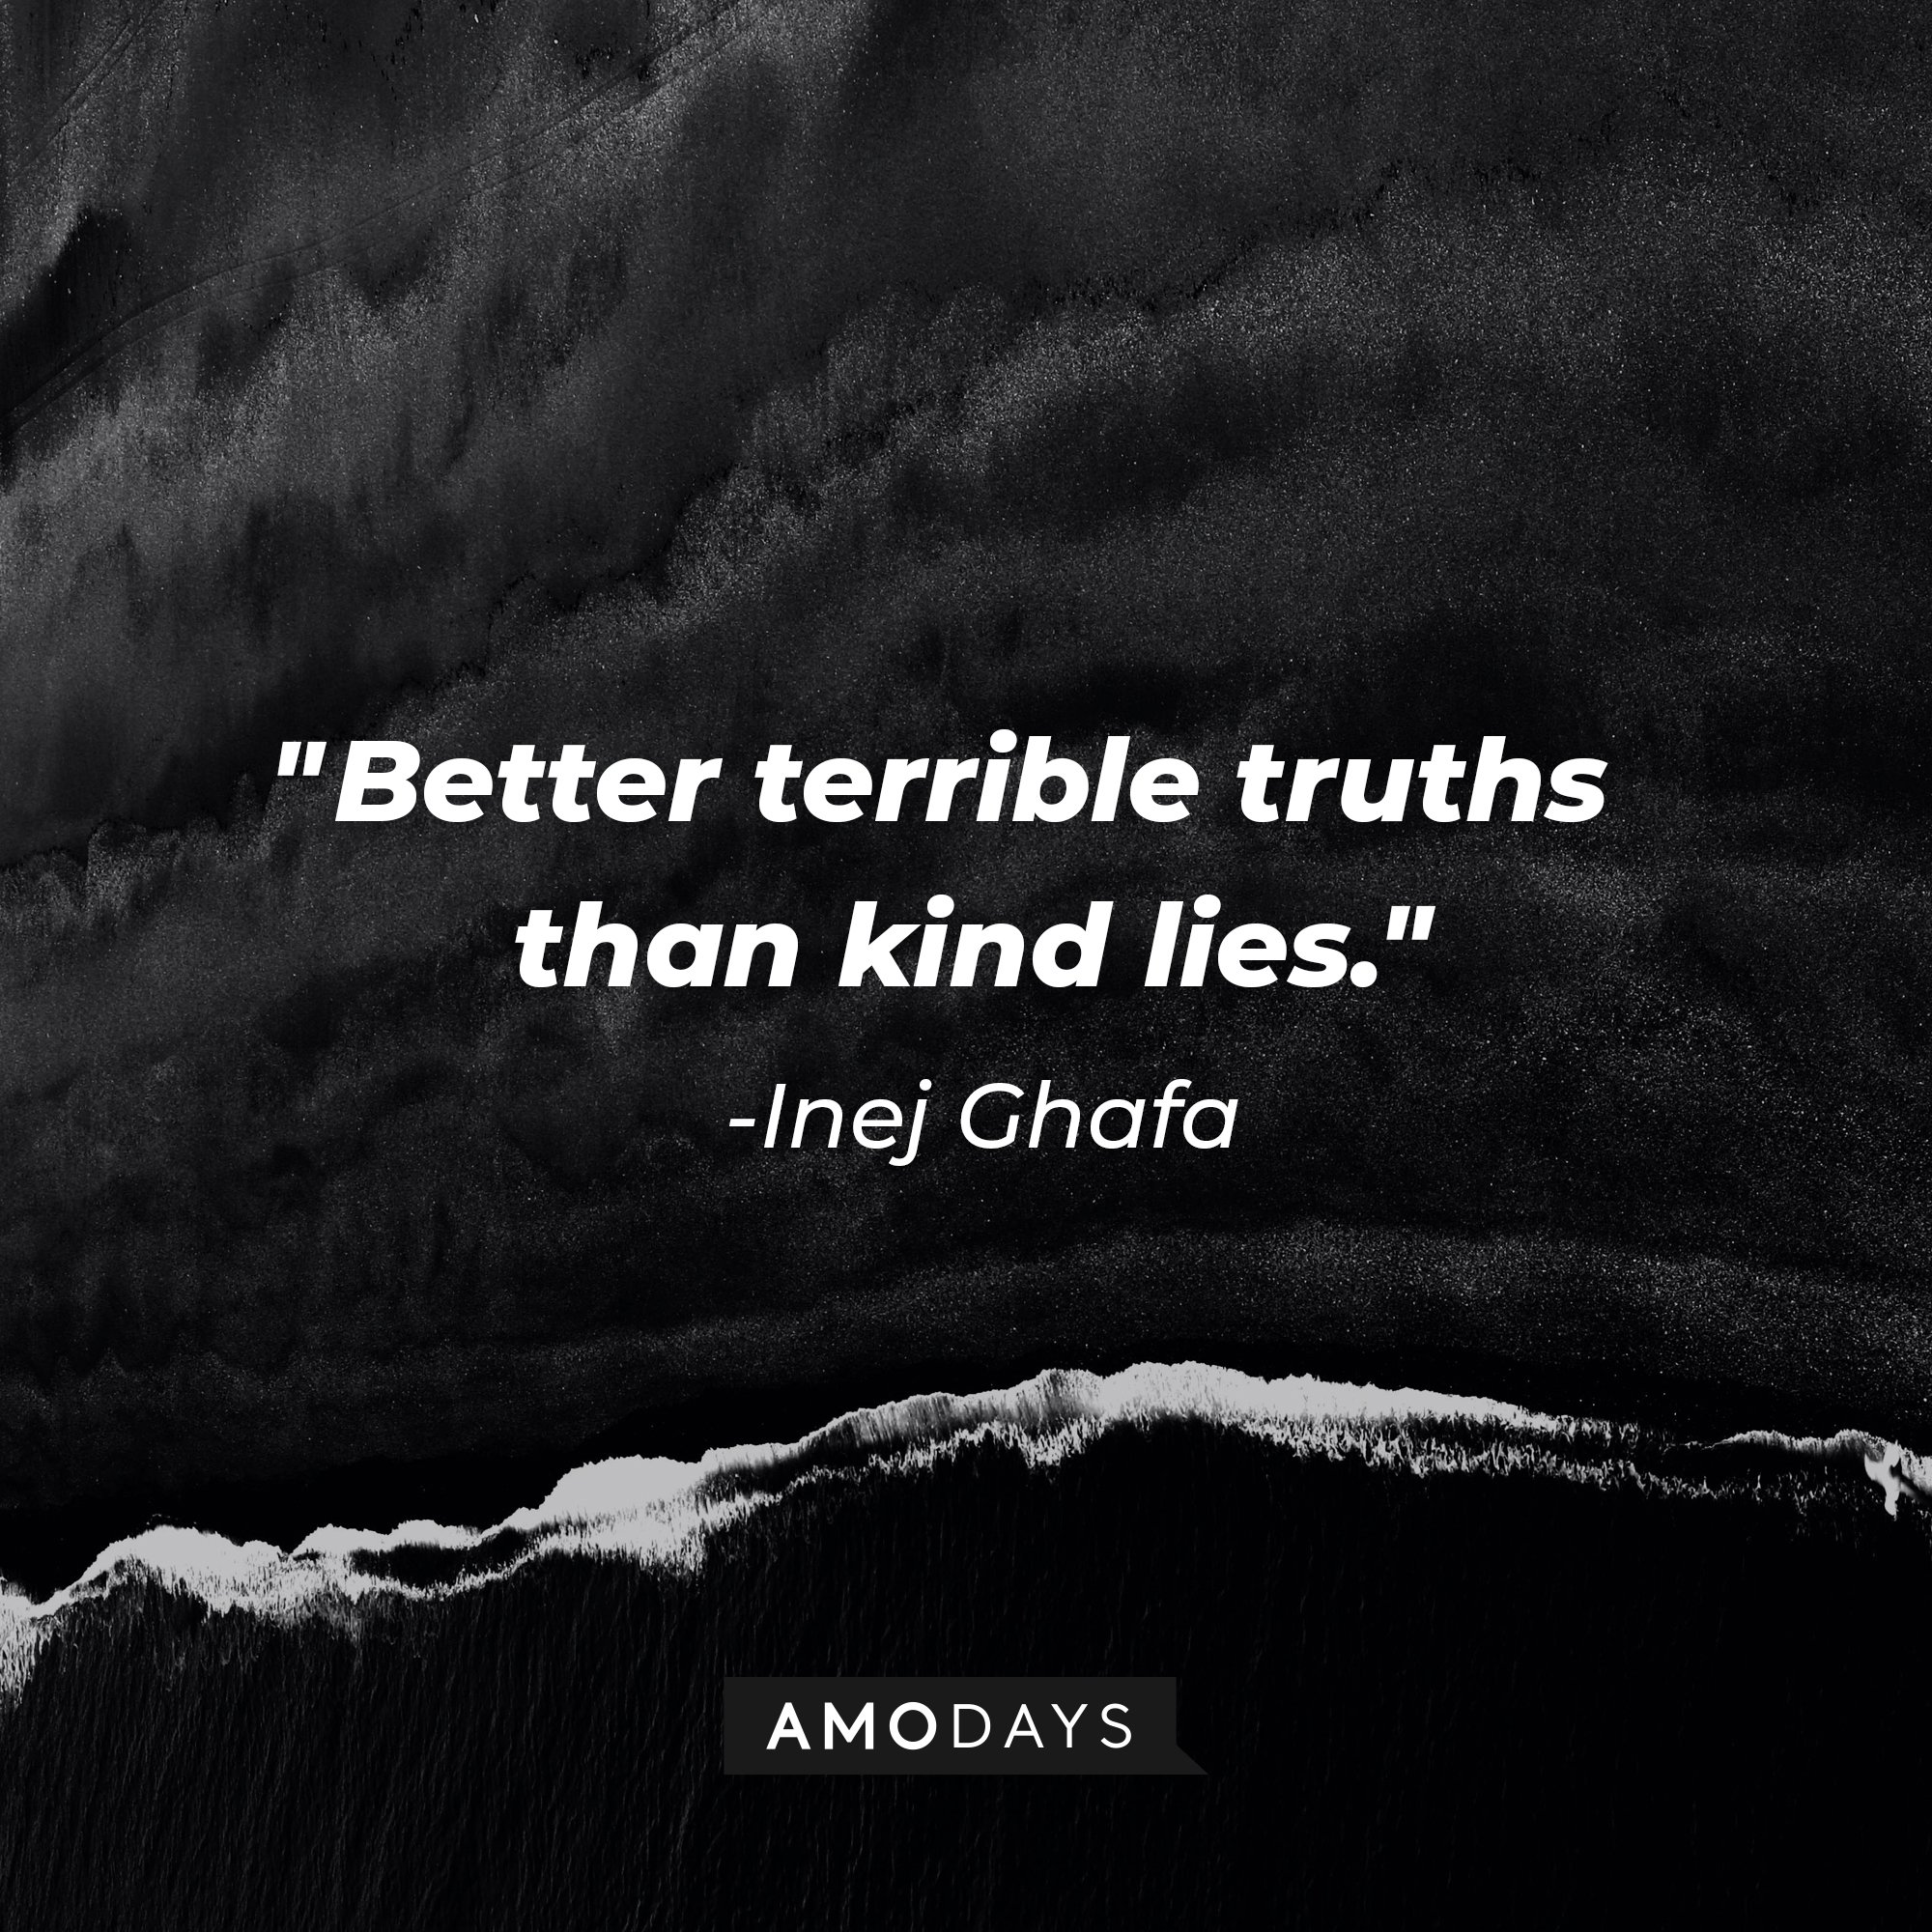 Inej Ghafa’s quote: "Better terrible truths than kind lies." | Image: AmoDays